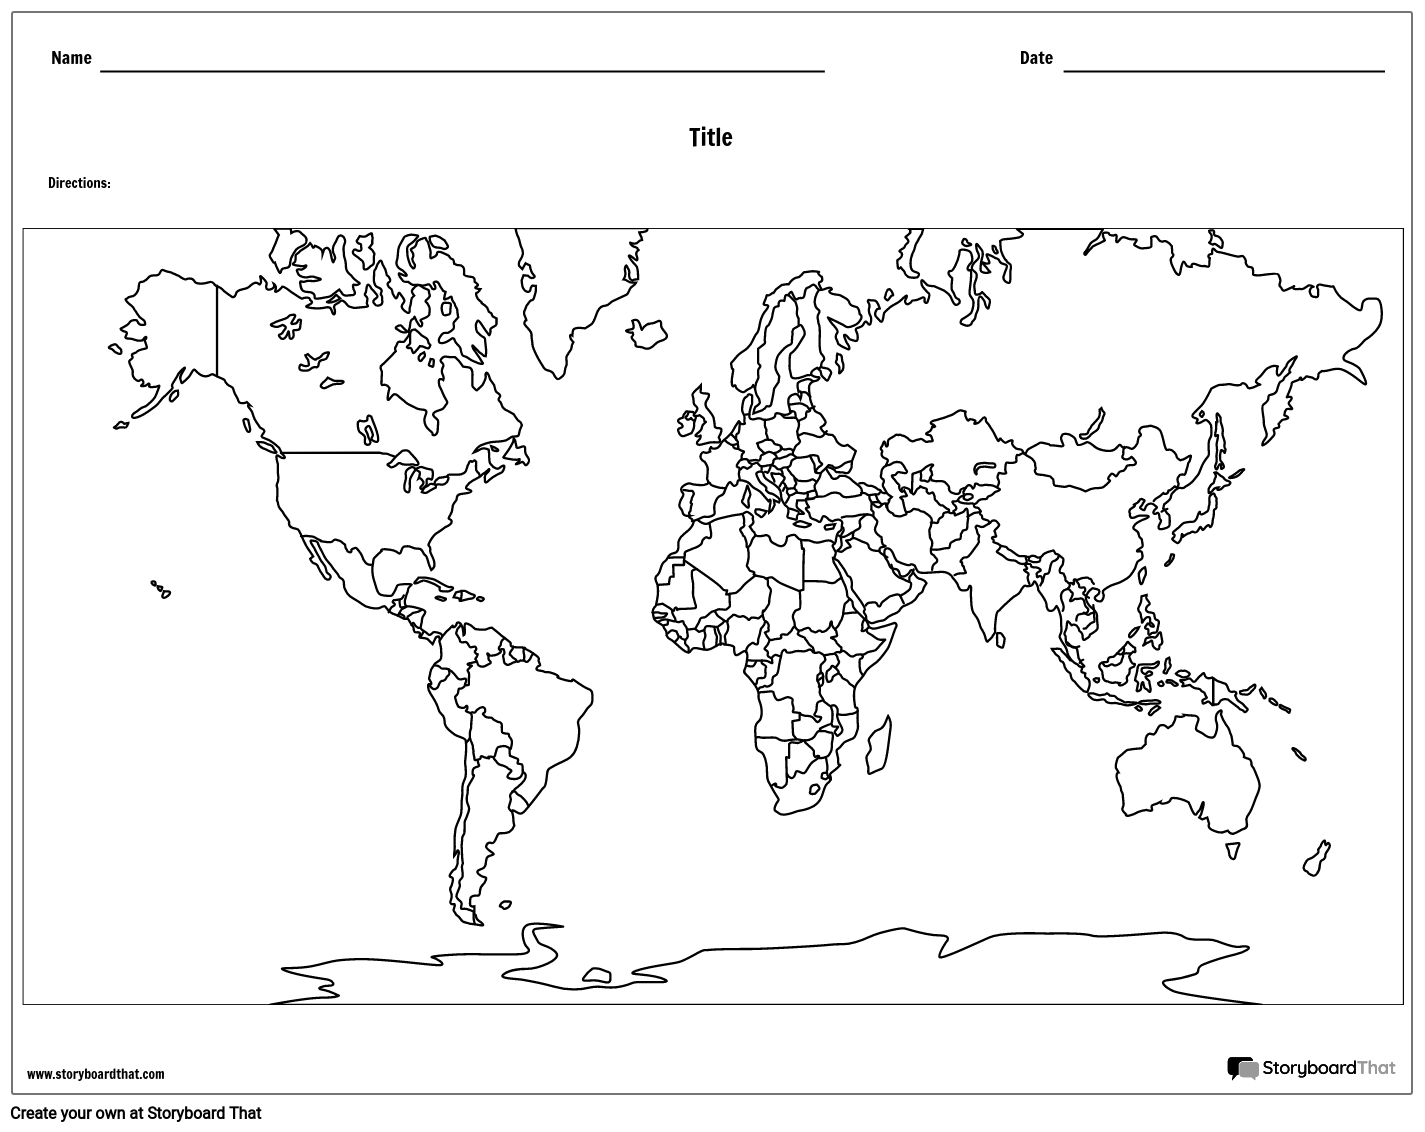 map-maker-create-a-map-online-map-worksheets-storyboardthat